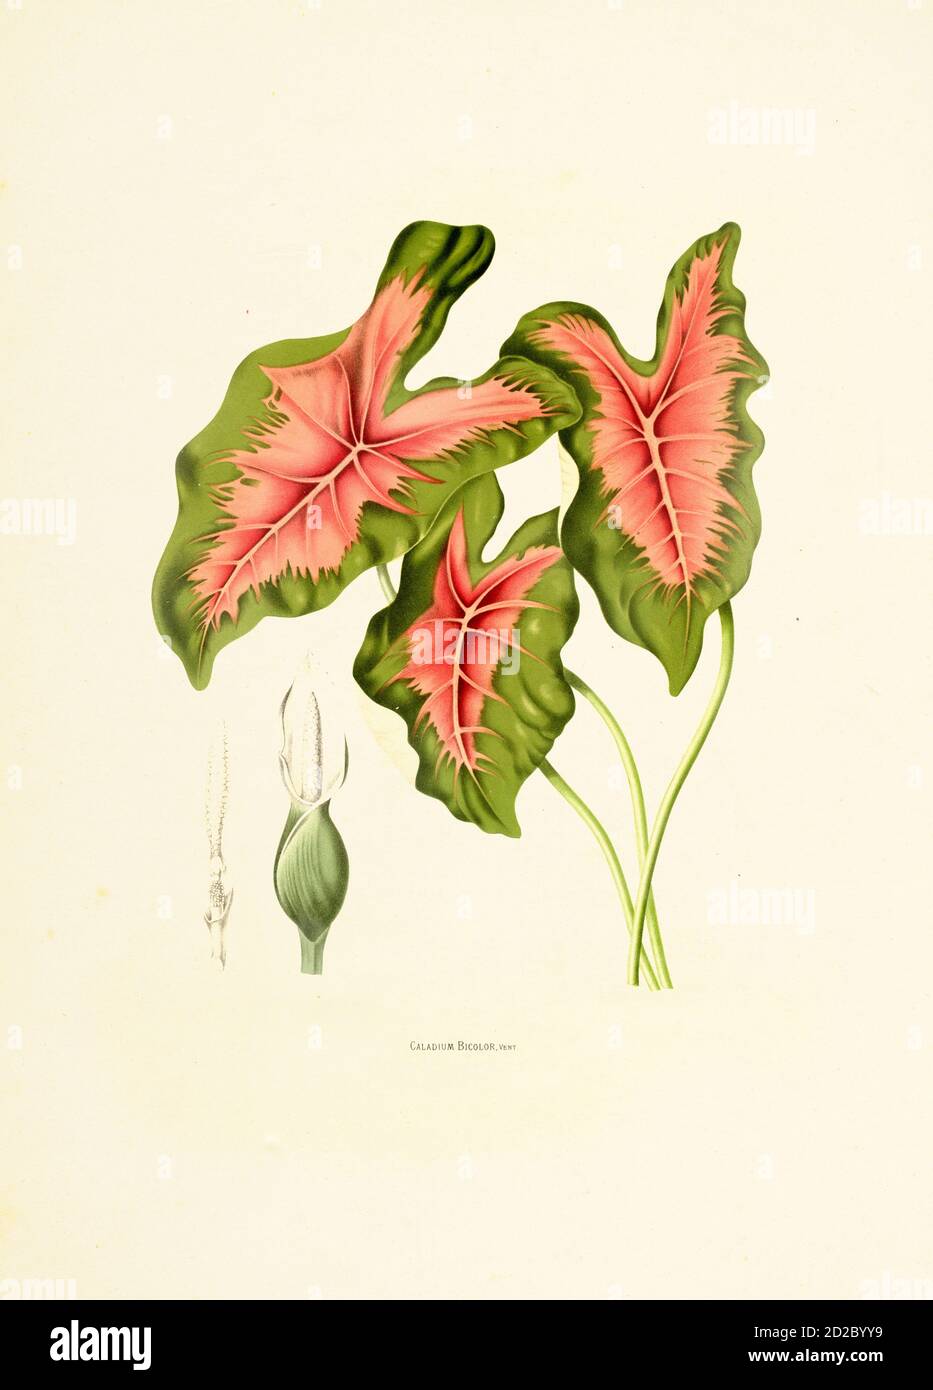 Antique illustration of a caladium bicolor (also known as heart of Jesus, elephant ear or angel wings). Engraving by Berthe Hoola van Nooten from the Stock Photo